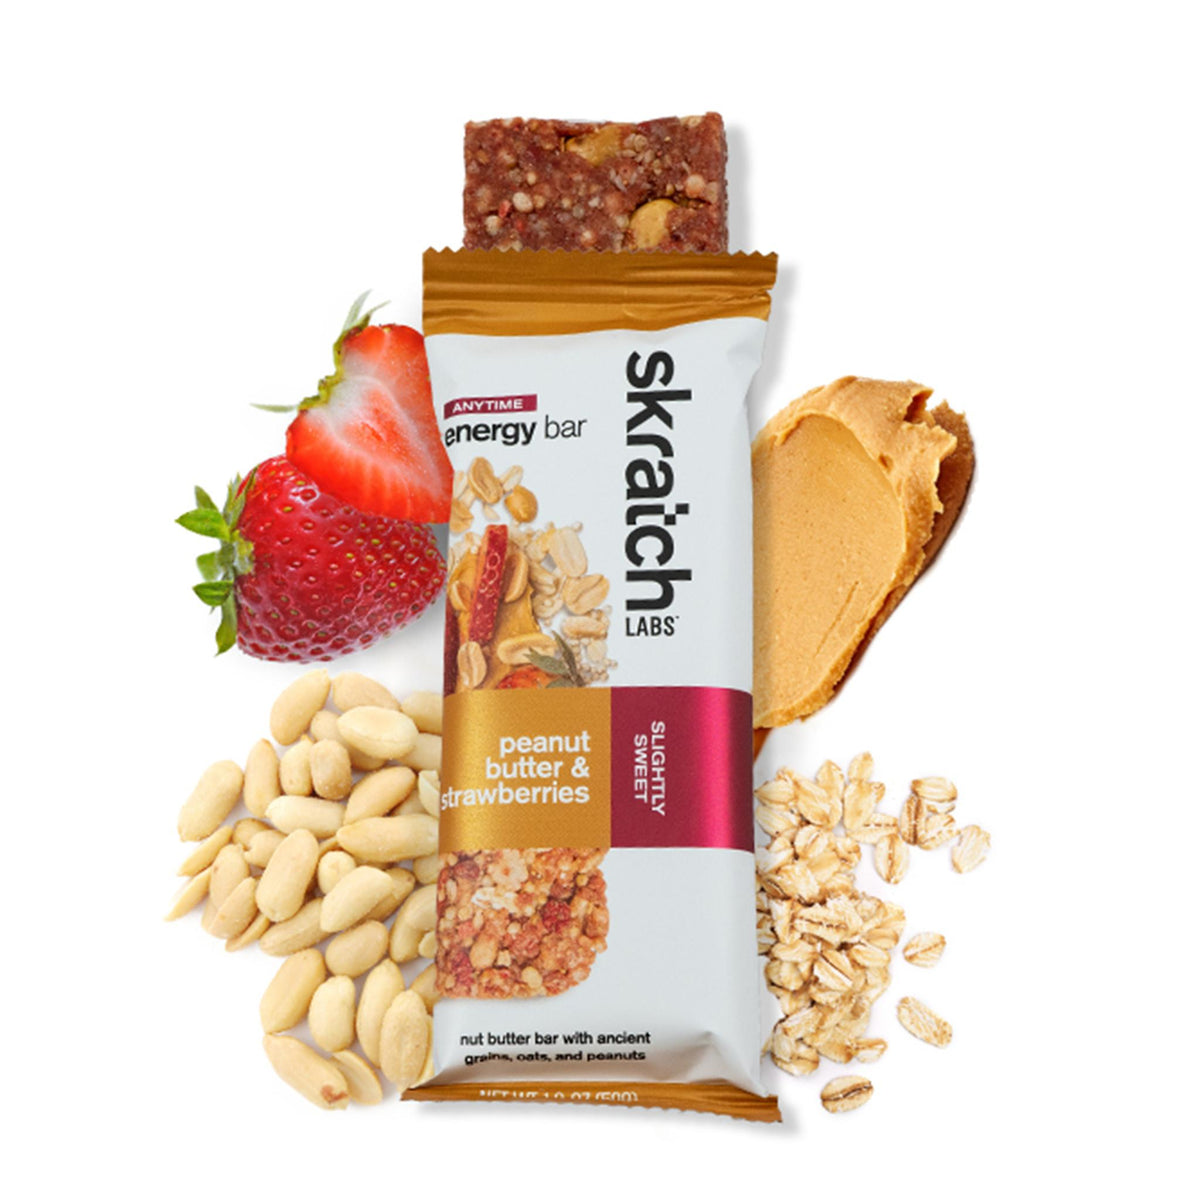 Skratch Labs Anytime Energy Bar - Peanut Butter and Strawberries